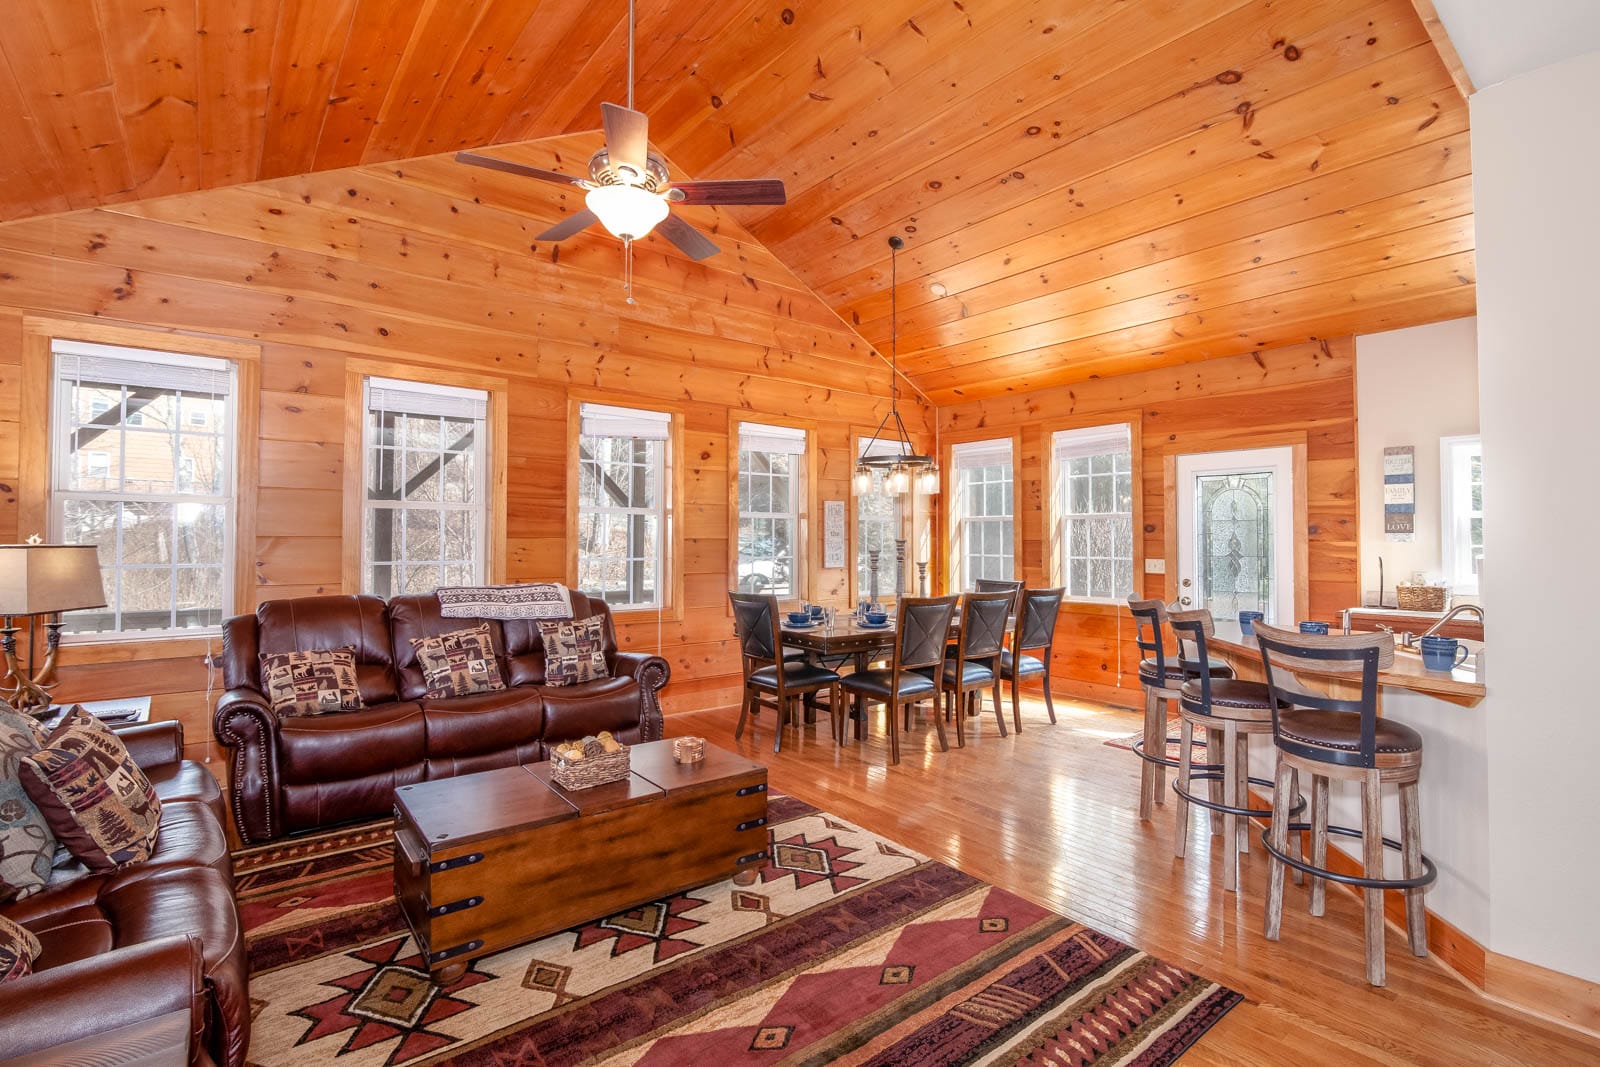 Mountain Bliss Chalet offers an Open Floor Plan with Great Room, Dining, and Kitchen